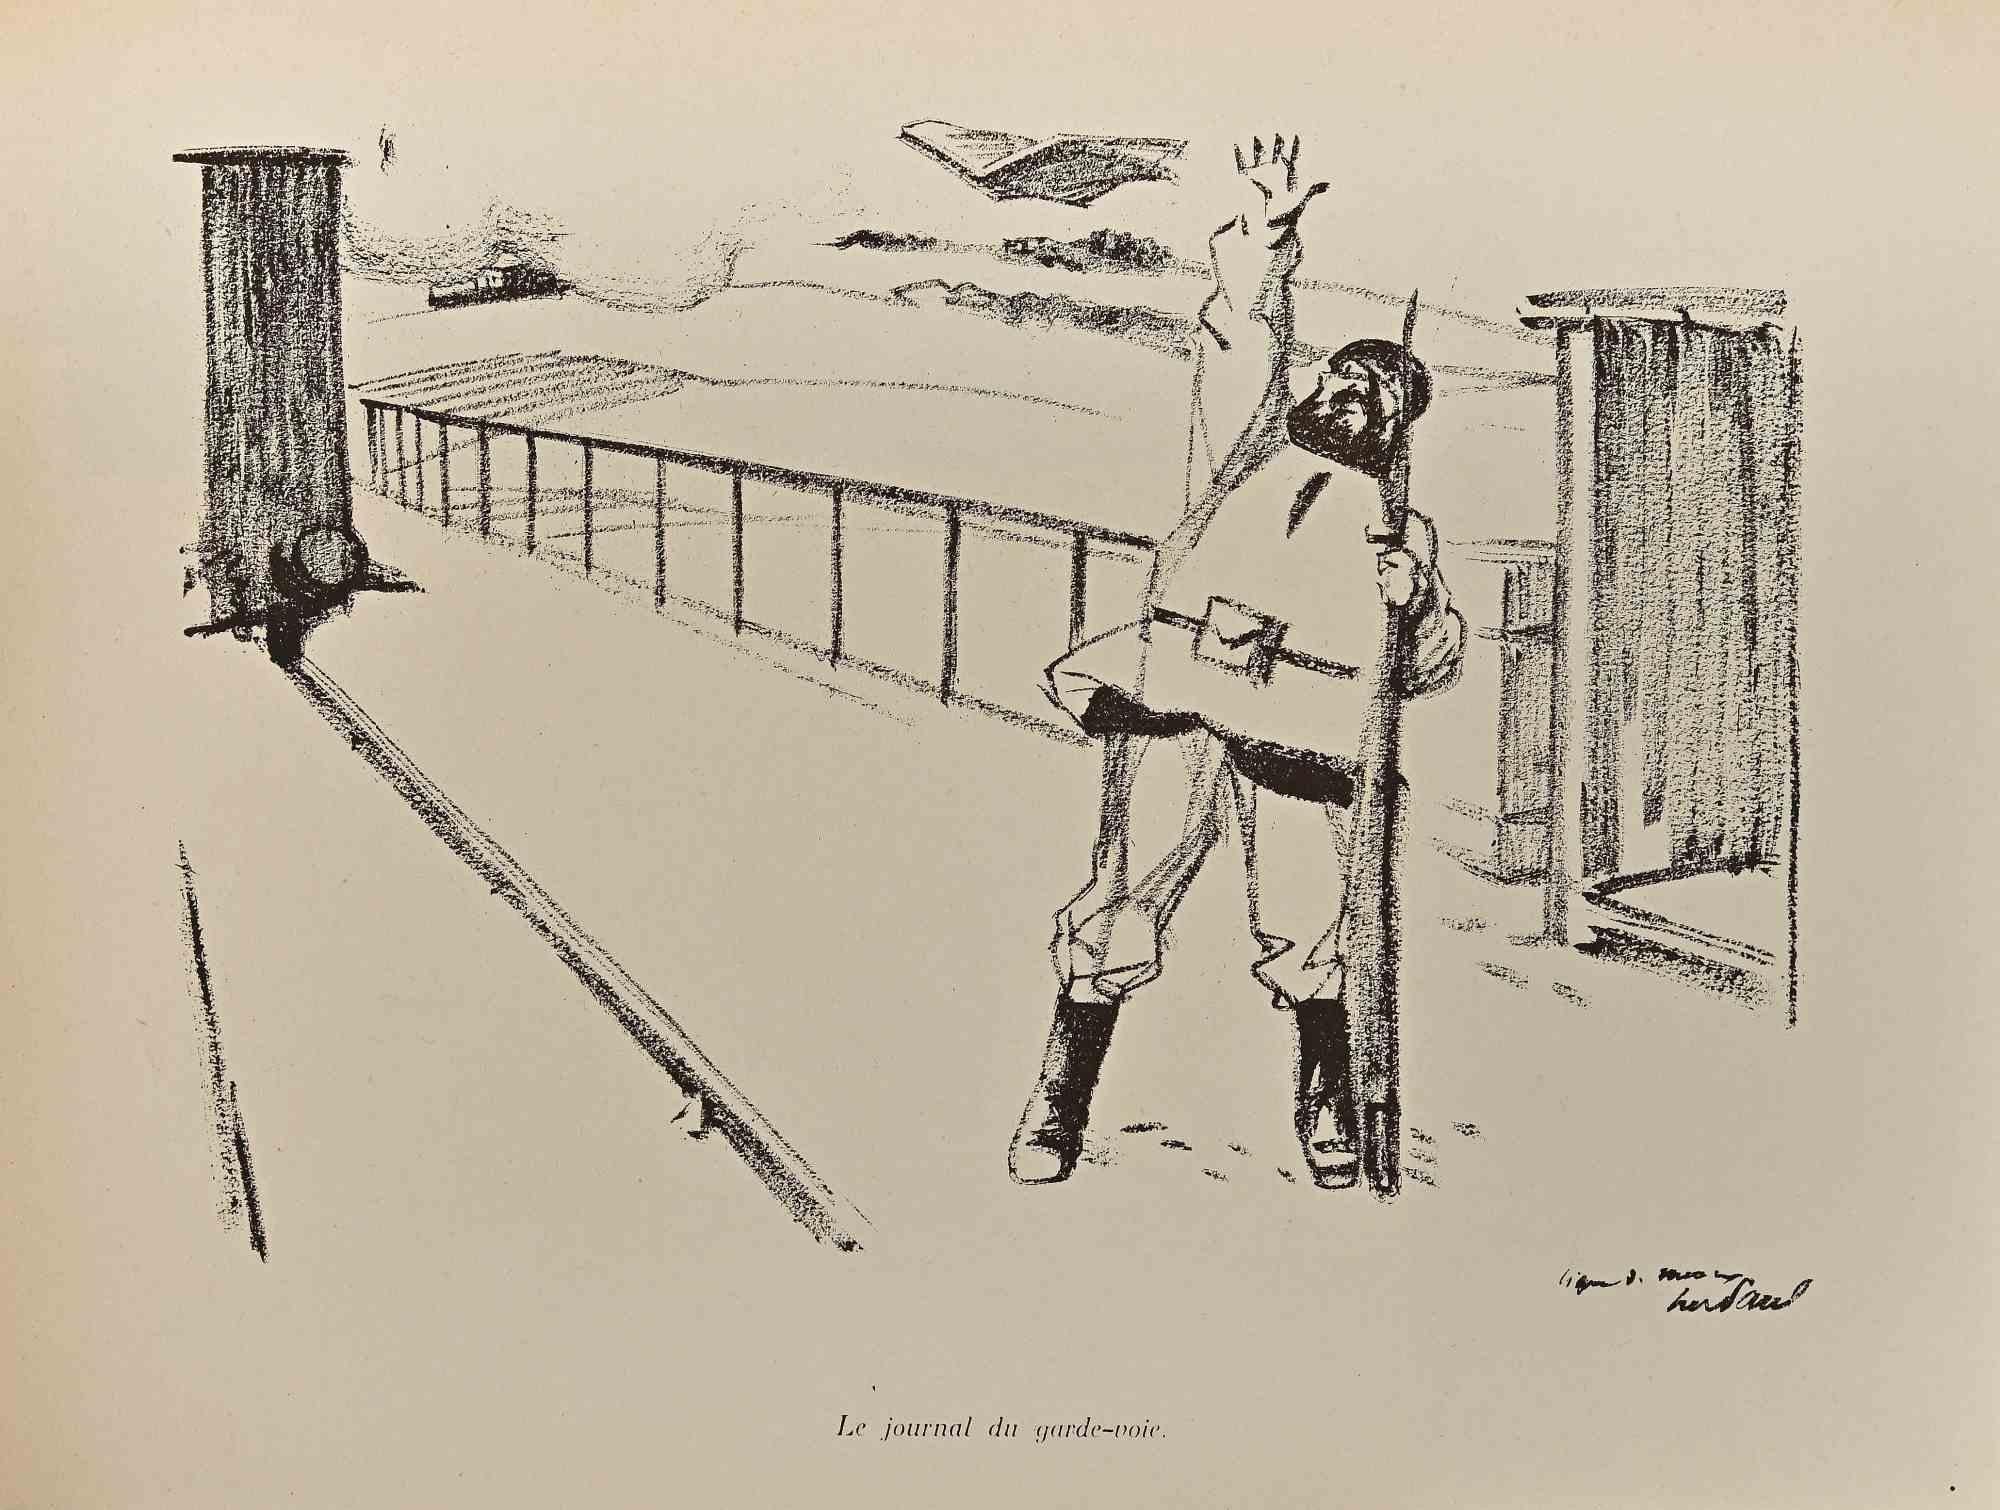 Le Journal du Grande-Voie is a vintage Lithograph realized by Hermann Paul from the series " La Grande Guerre Par Les Artistes"

Good condition on a yellowed cardboard.

Signed and titled on the lower margin, number 2 of fourth collection.

René